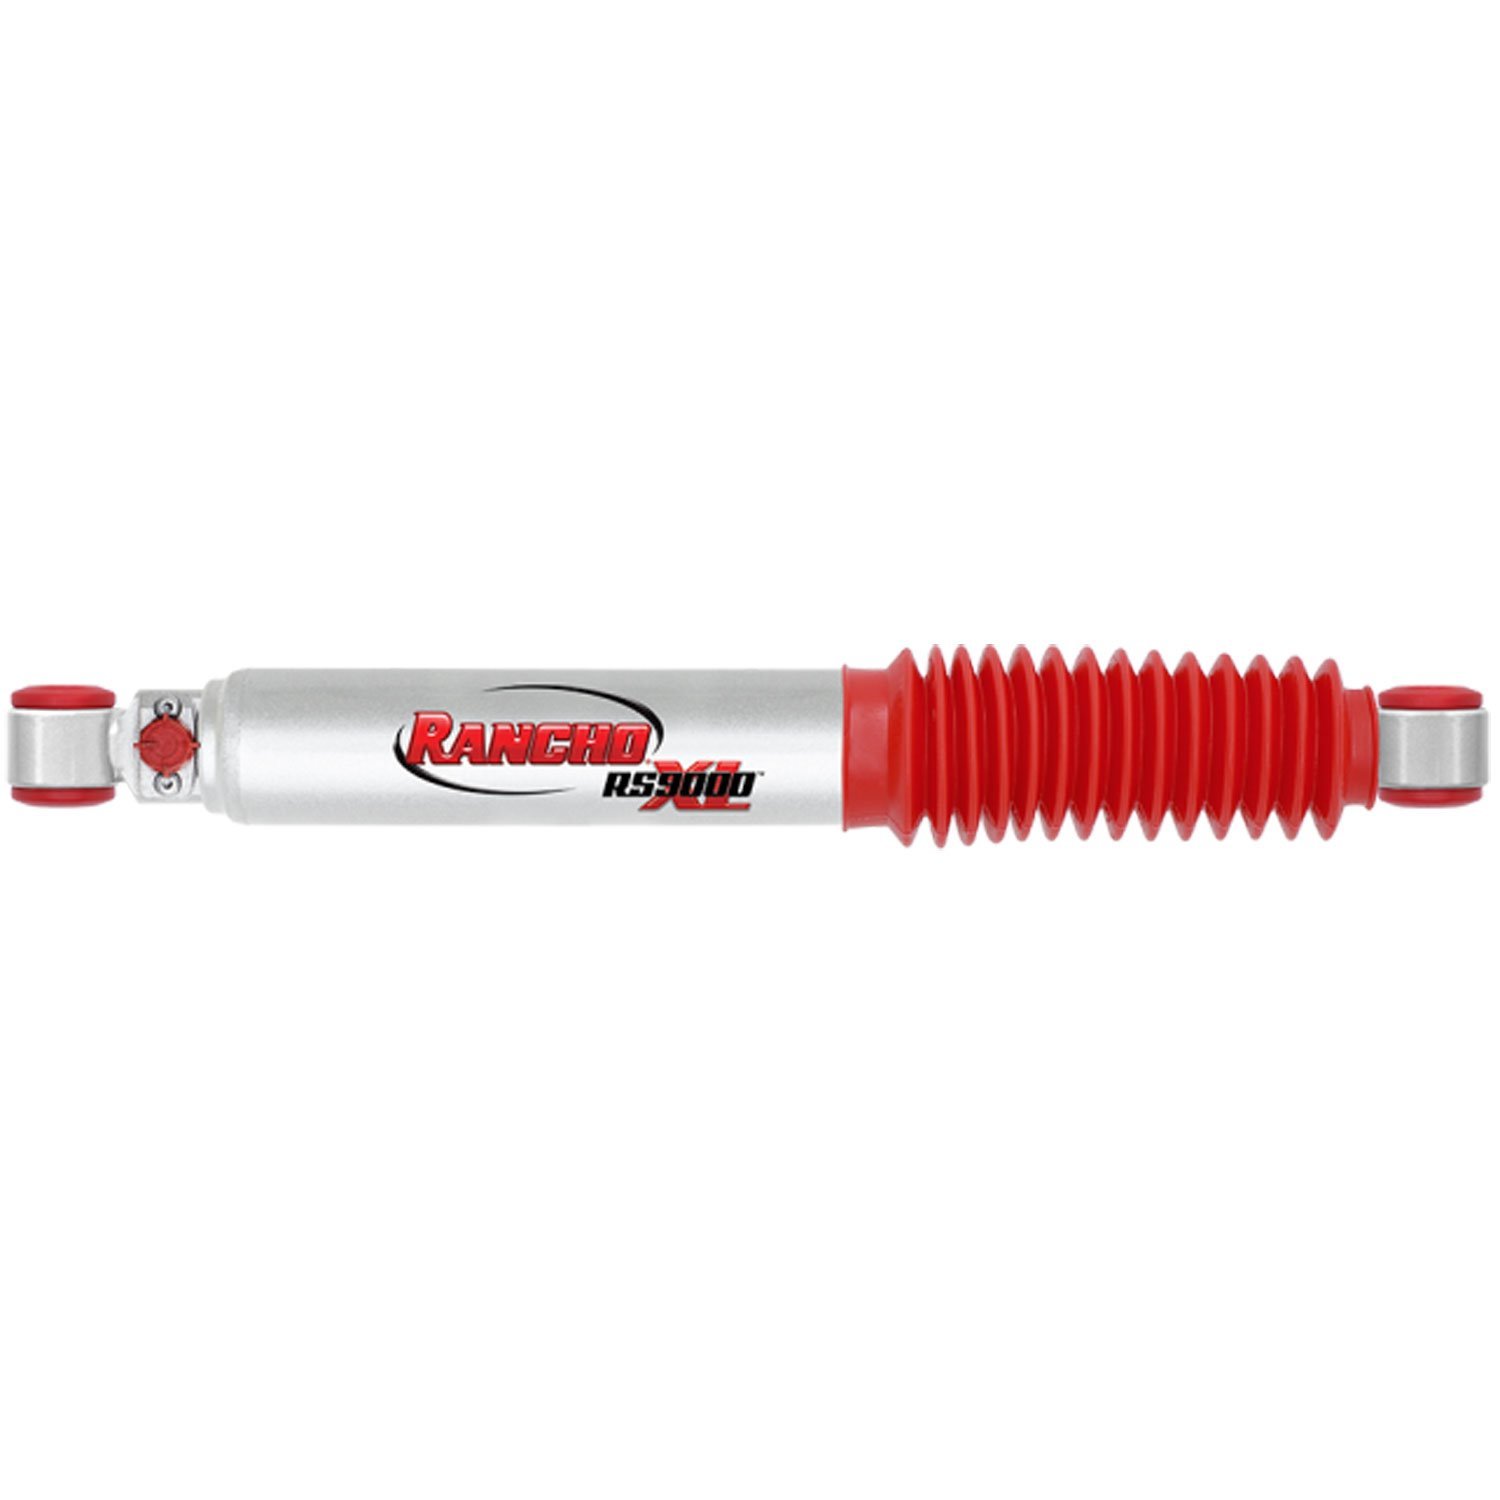 RS9000XL Rear Shock Absorber Fits Toyota 4Runner, Land